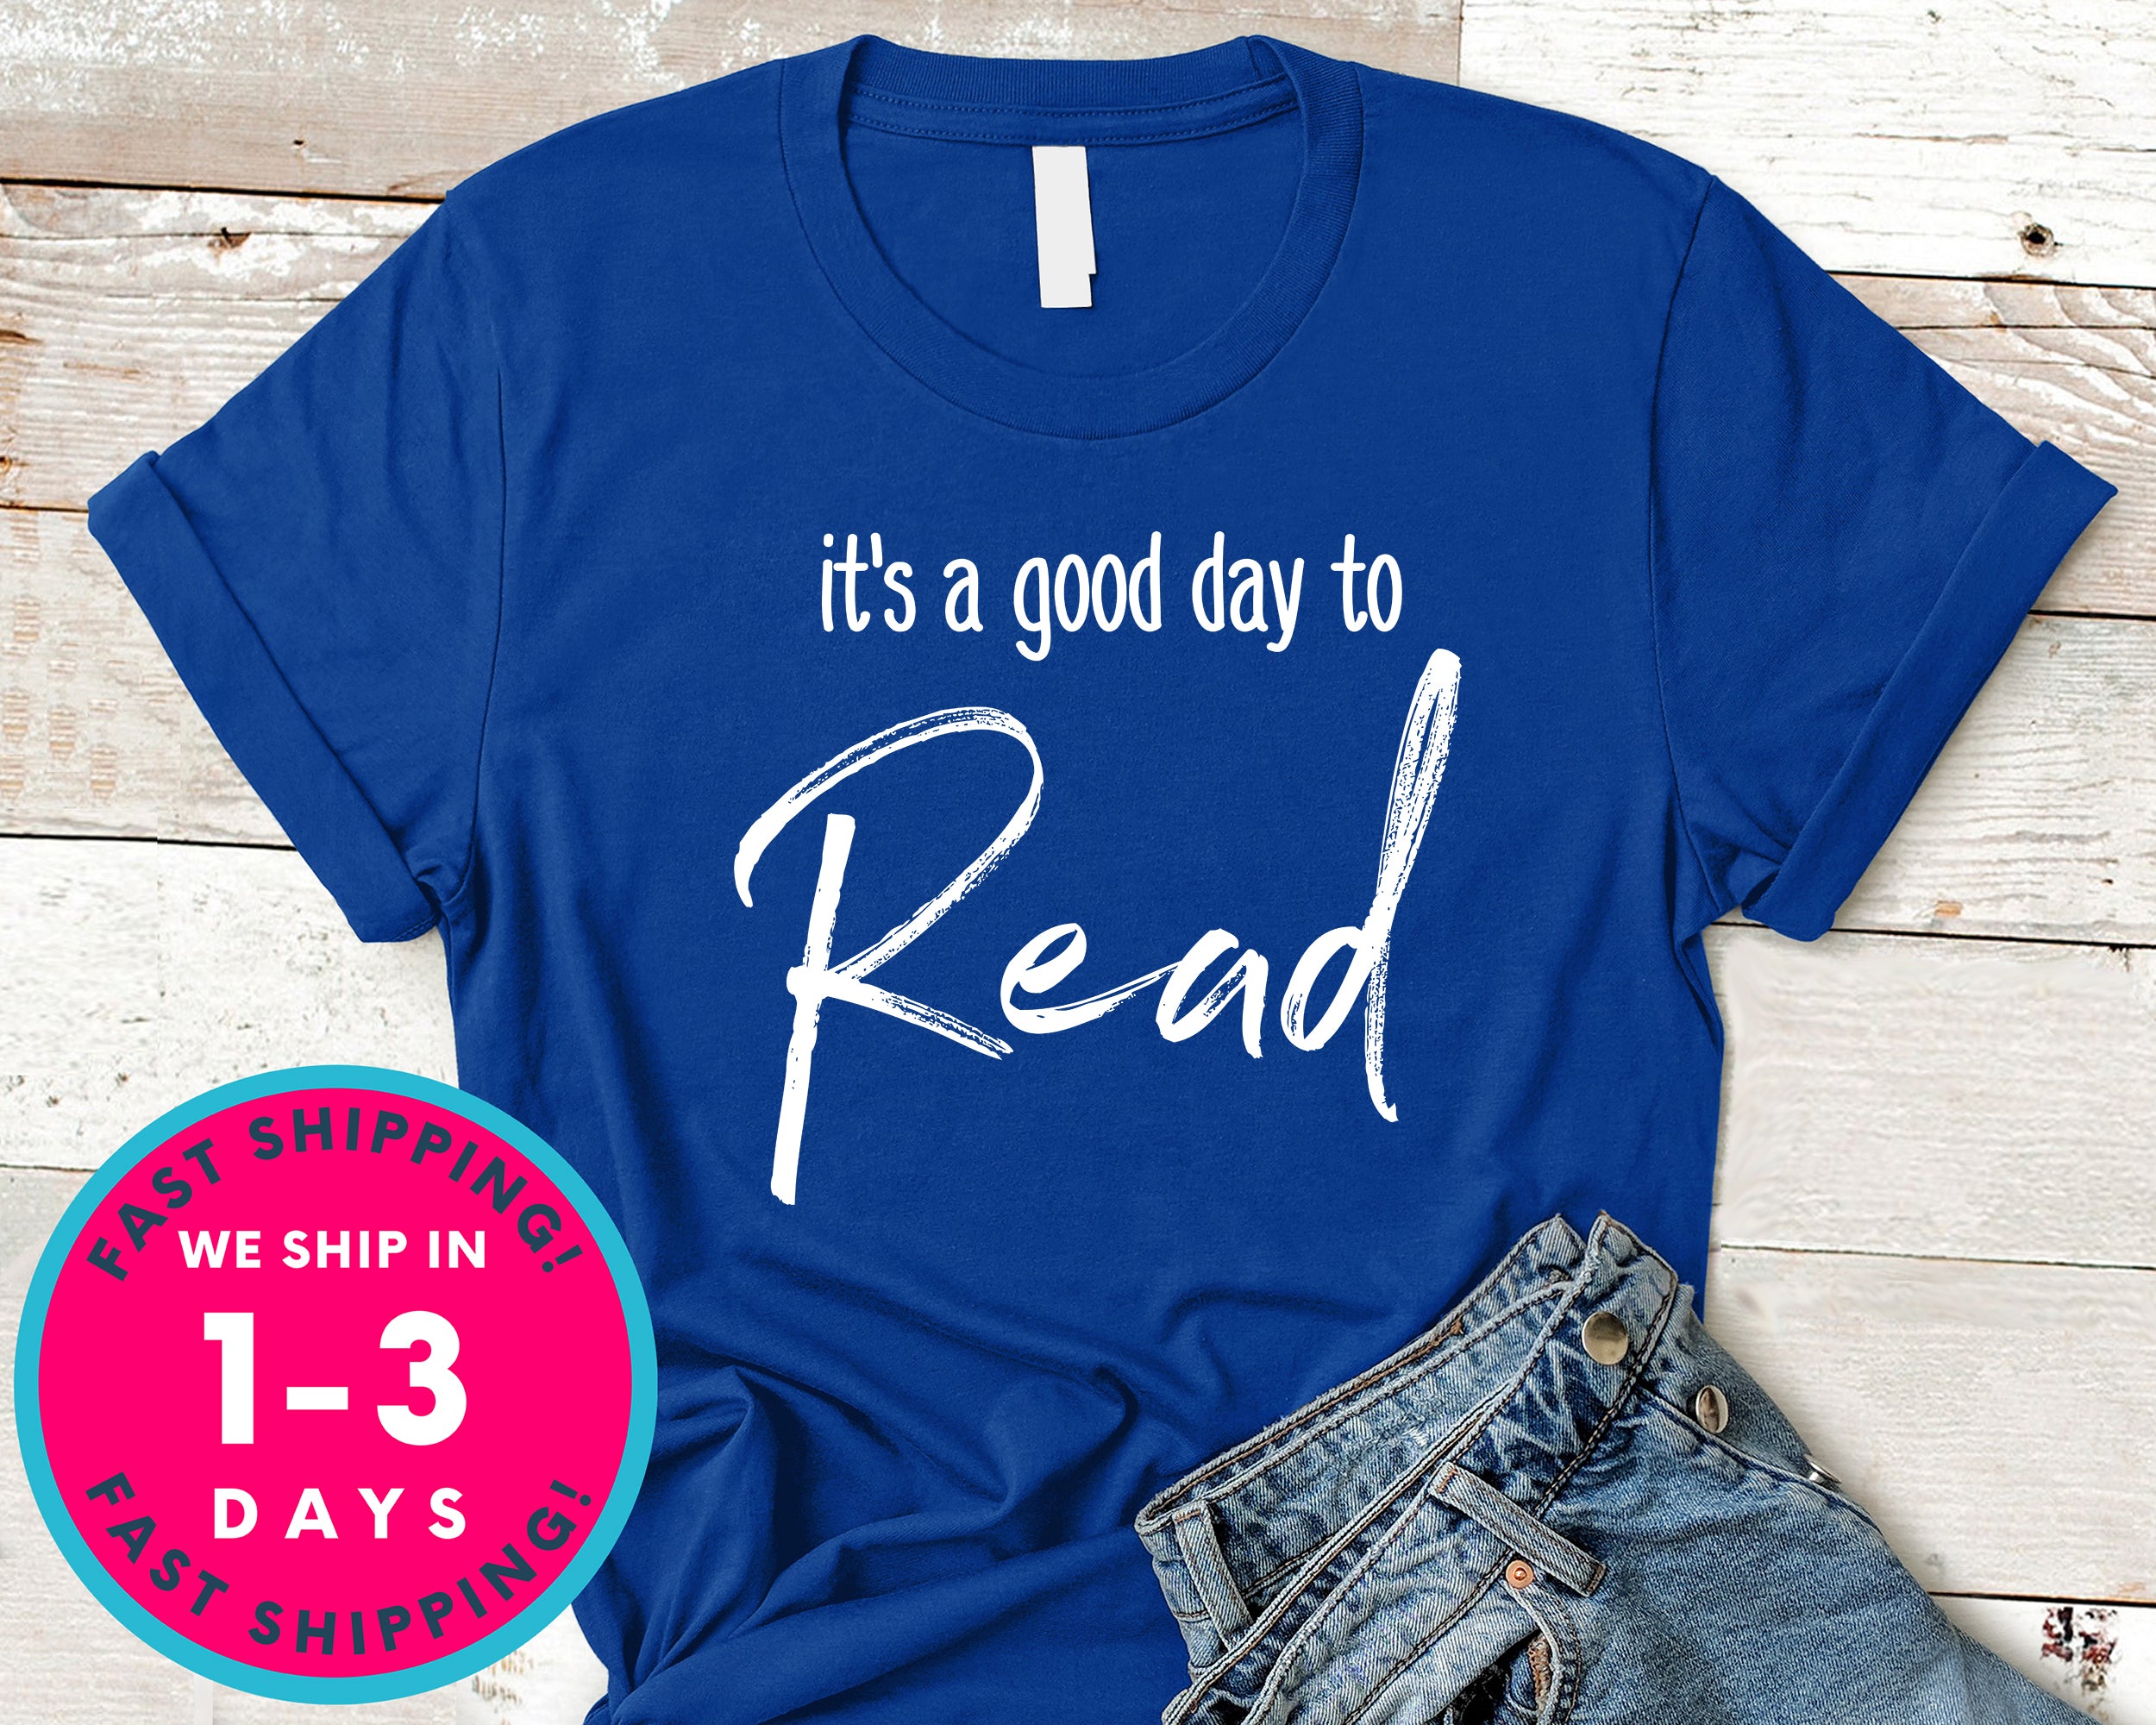 It's A Good Day To Read A Book T-Shirt - Inspirational Quotes Saying Shirt